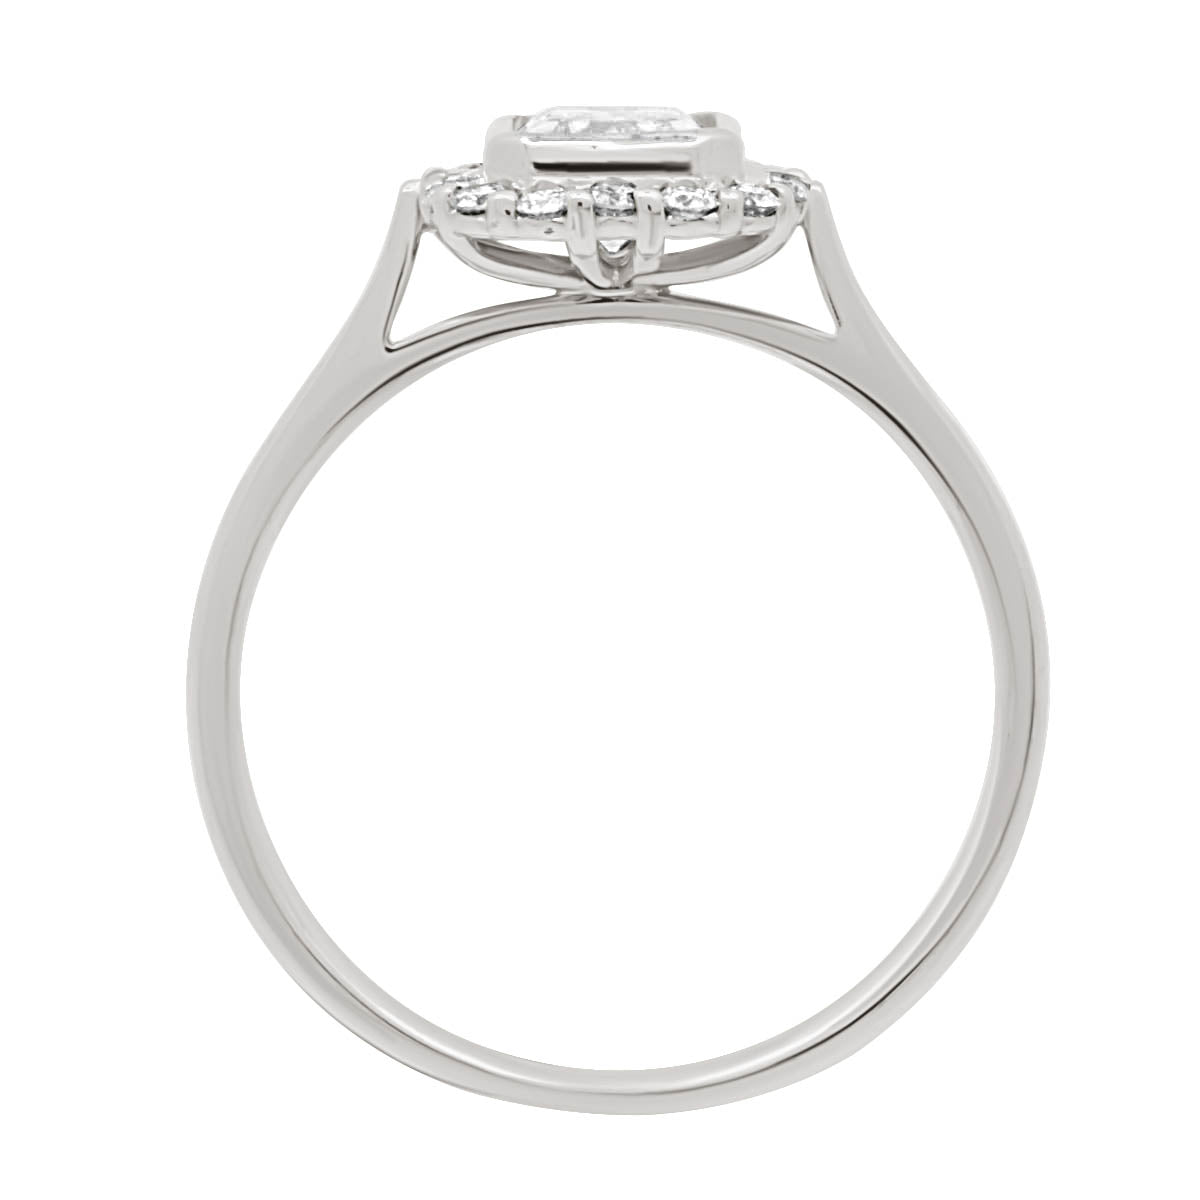 Emerald Halo Engagement Ring in white gold pictured standing vertically